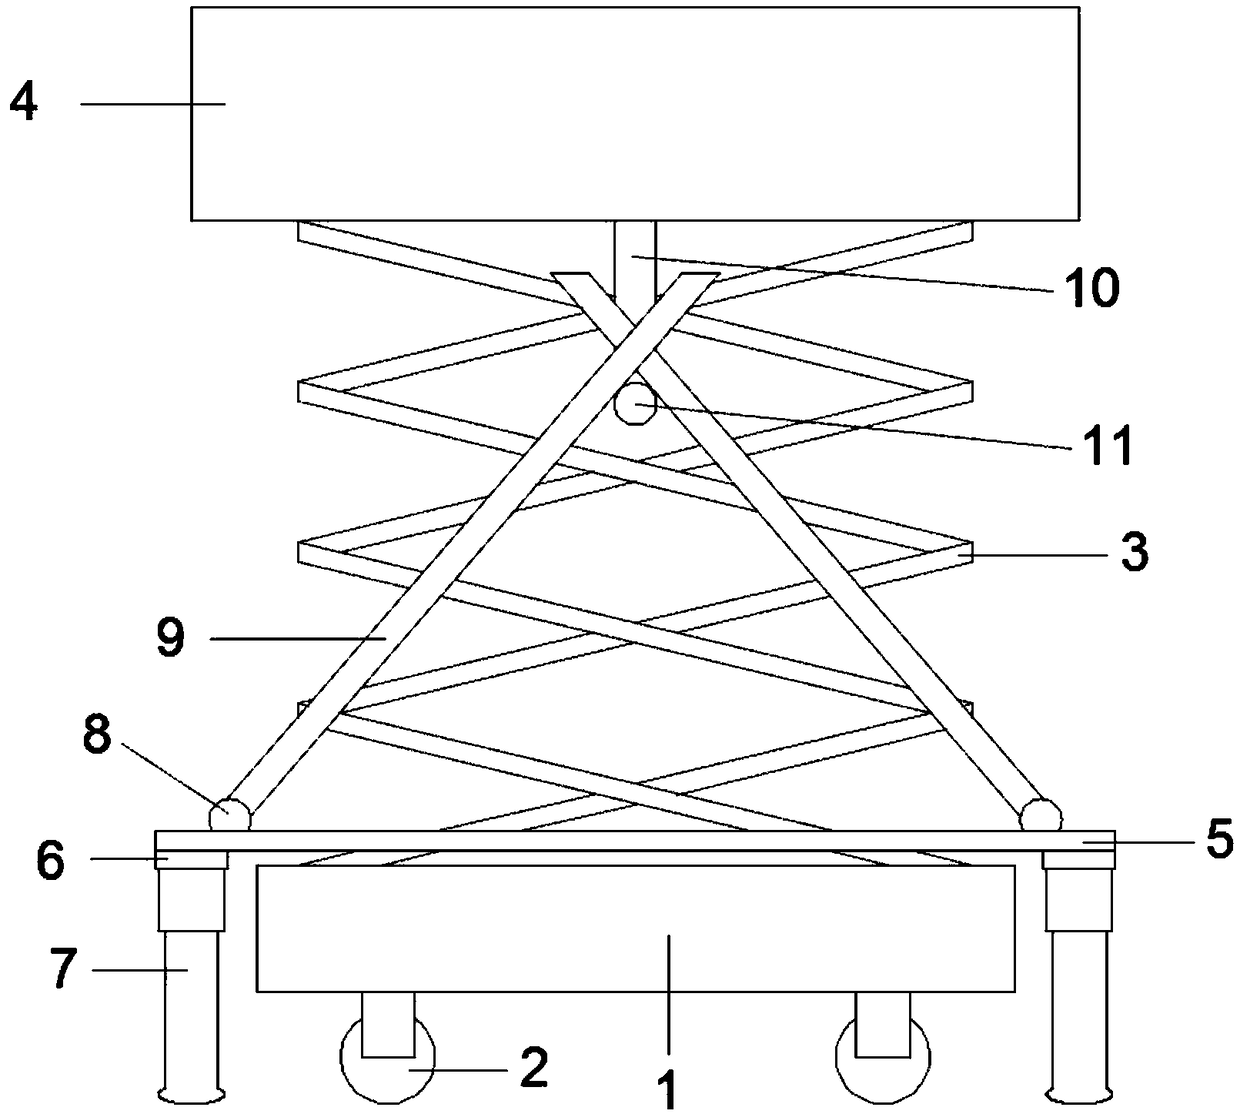 Small-sized movable type stereoscopic lifting platform